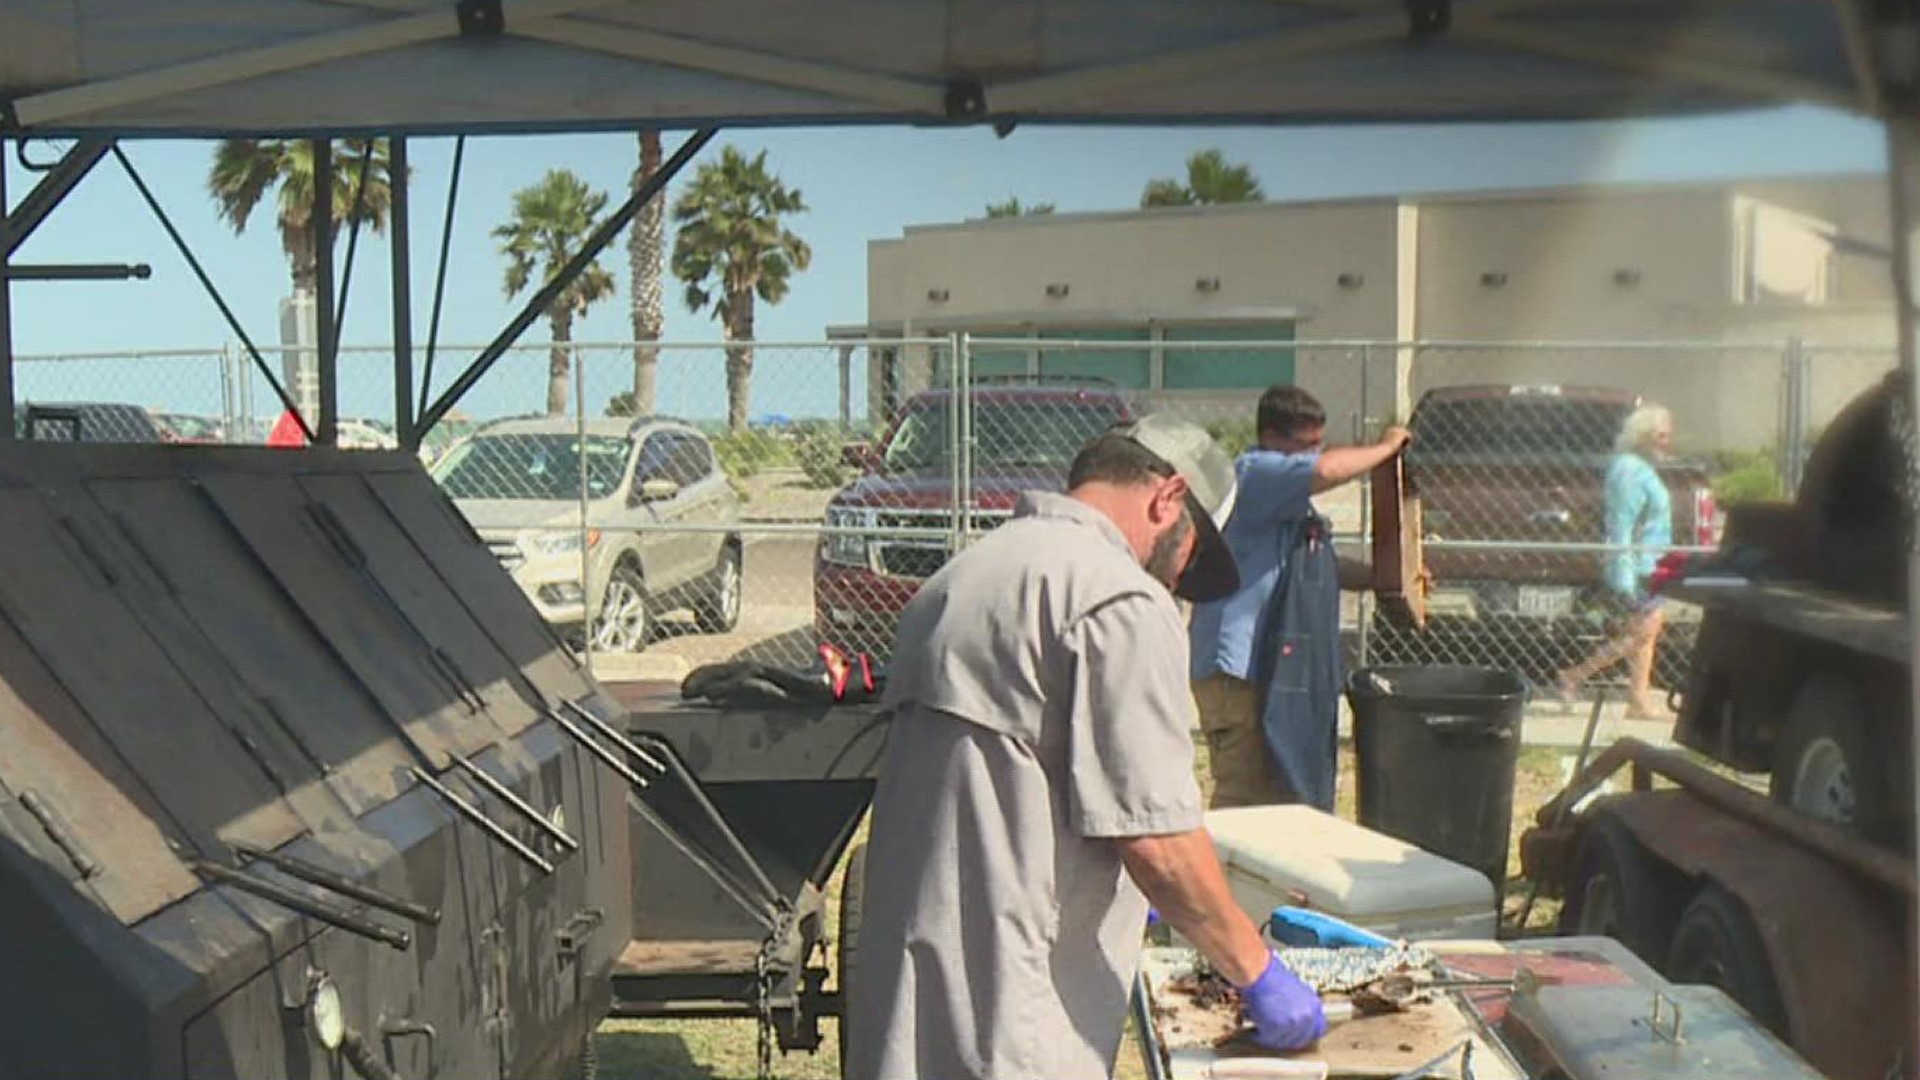 This year's barbecue fundraiser is helping to raise money for a new Boys and Girls Club in Aransas County.